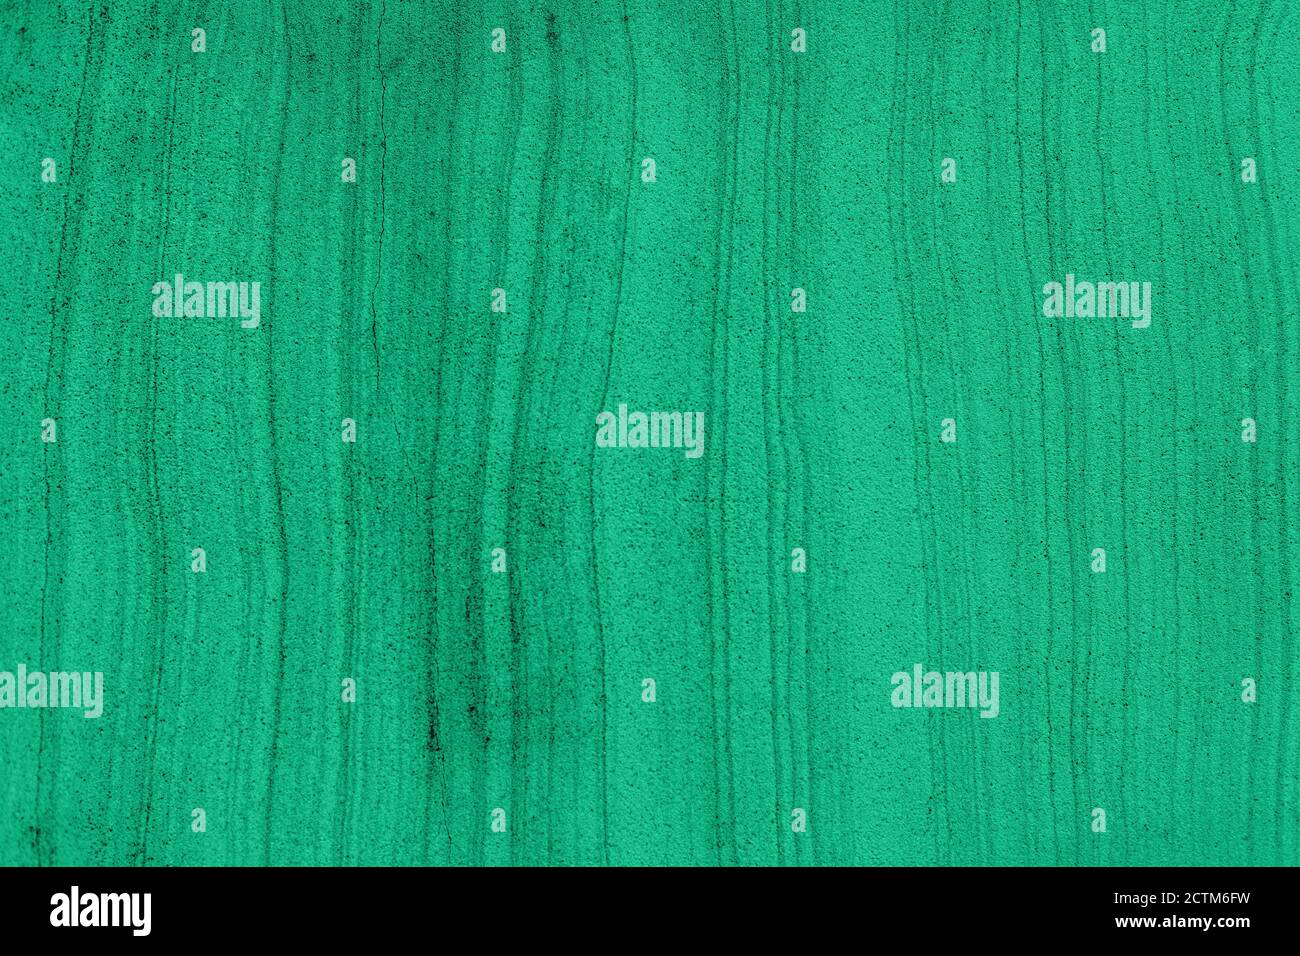 mint colored low contrast Concrete textured background Stock Photo - Alamy